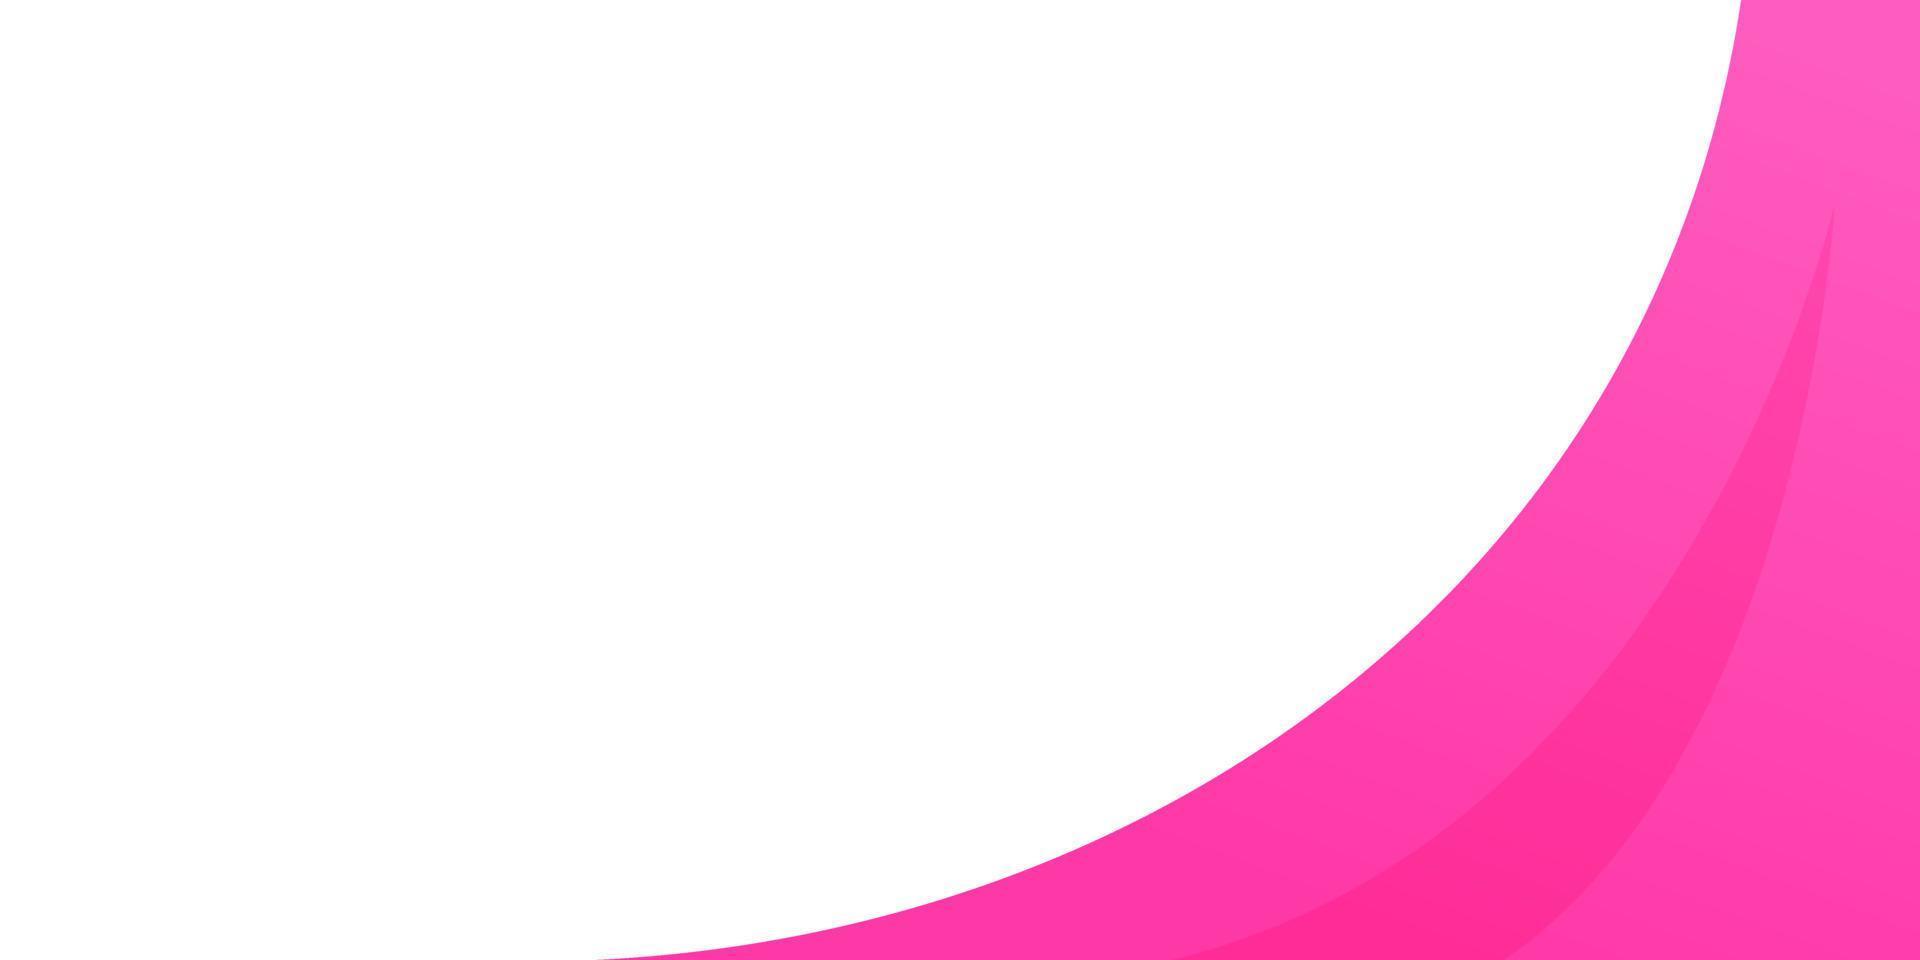 simple pink background design with space for text placement vector